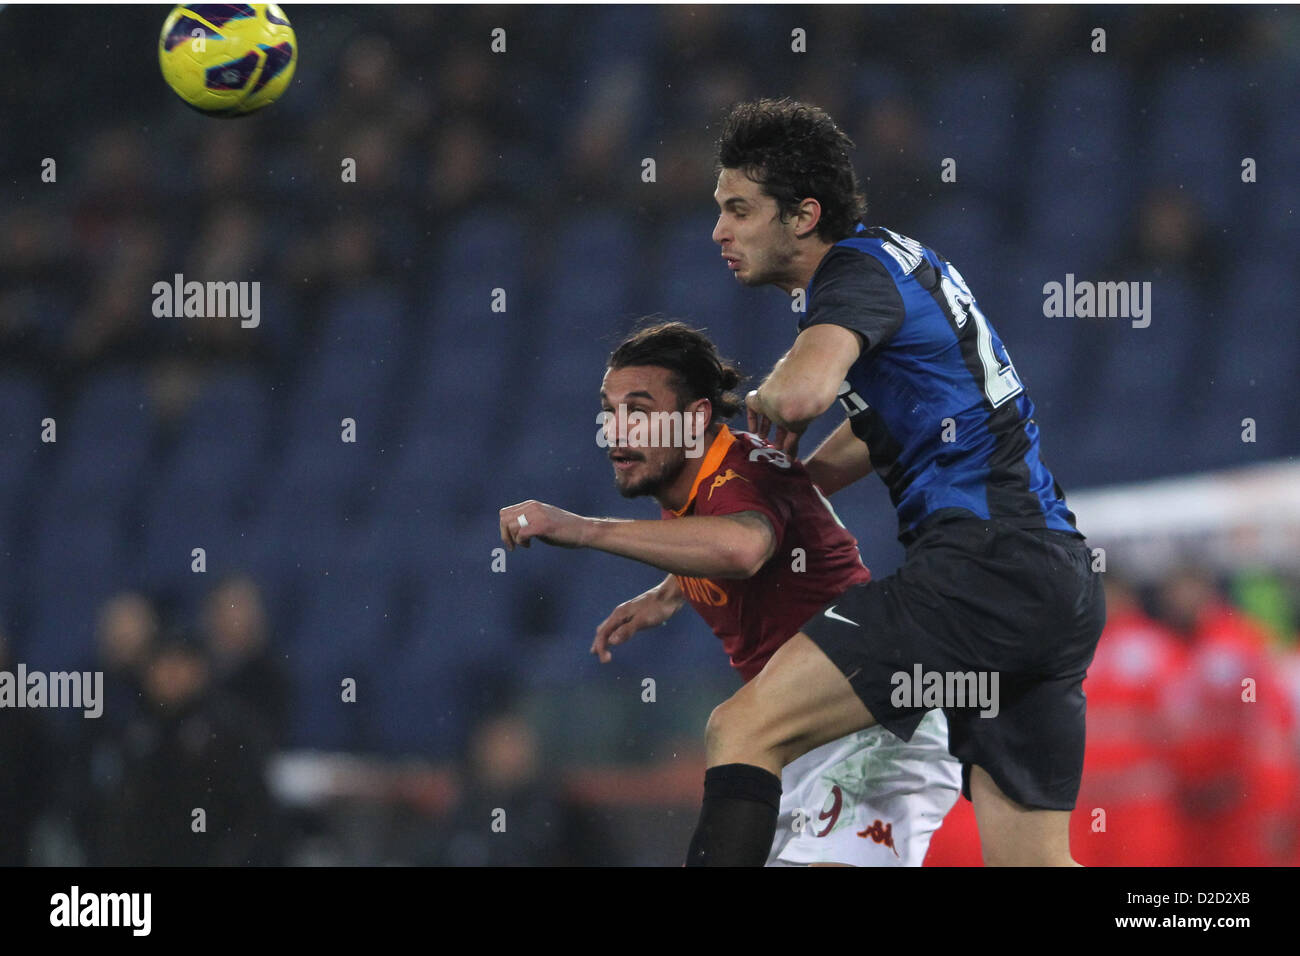 20.01.2013 Rome, Italy. Pablo Daniel Osvaldo and Andrea Ranocchia in action during the Serie A game between Roma and Inter Milan from the Stadio Olympico. Stock Photo